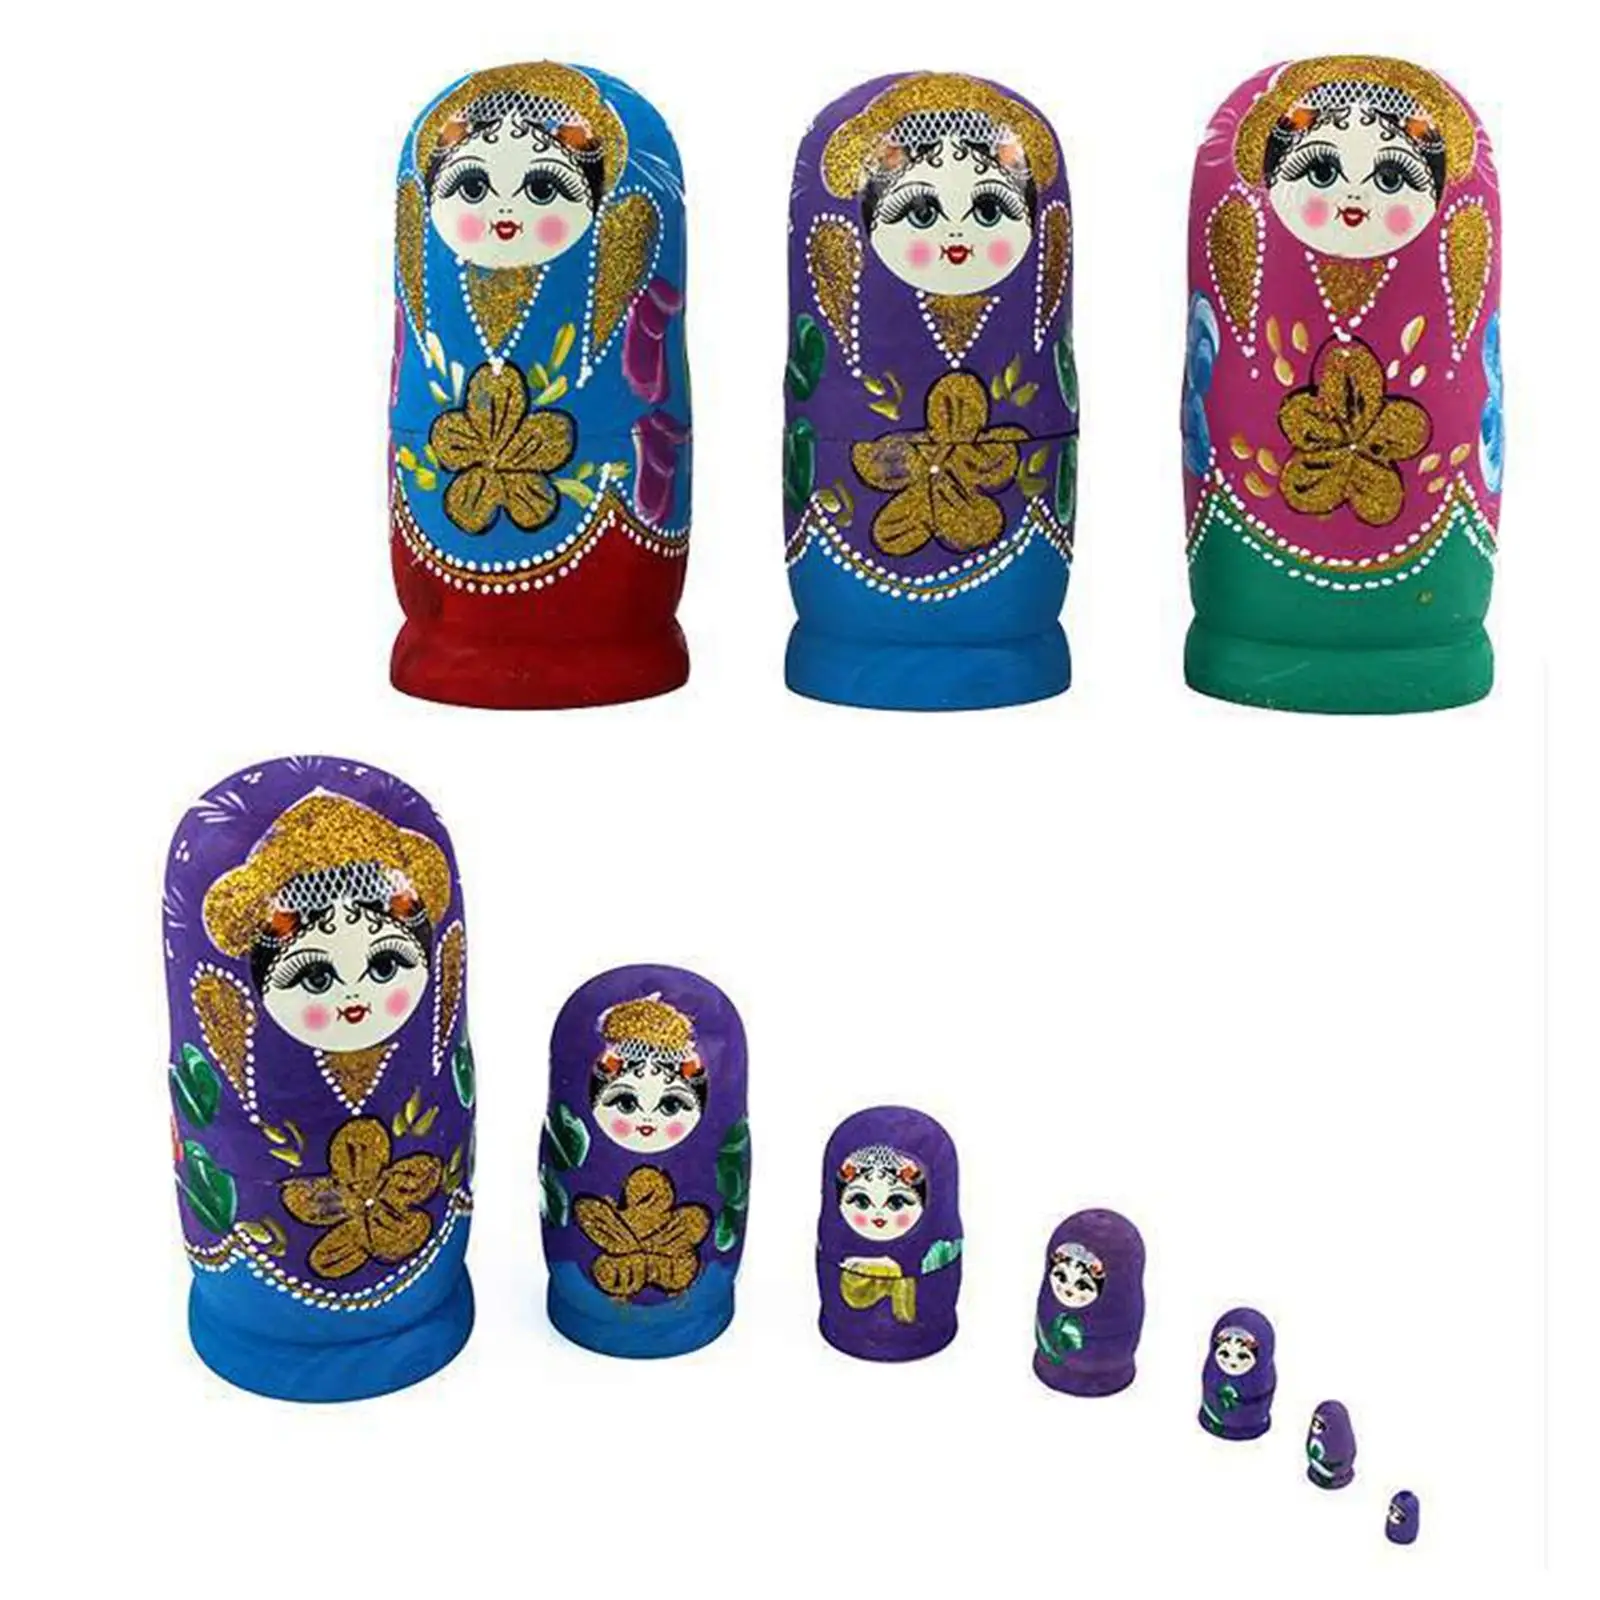 7 Pieces Russian Nesting Doll Matryoshka Dolls Hand Painted Traditional Wood Stacking Nested Set for Birthday Gift Table Kids